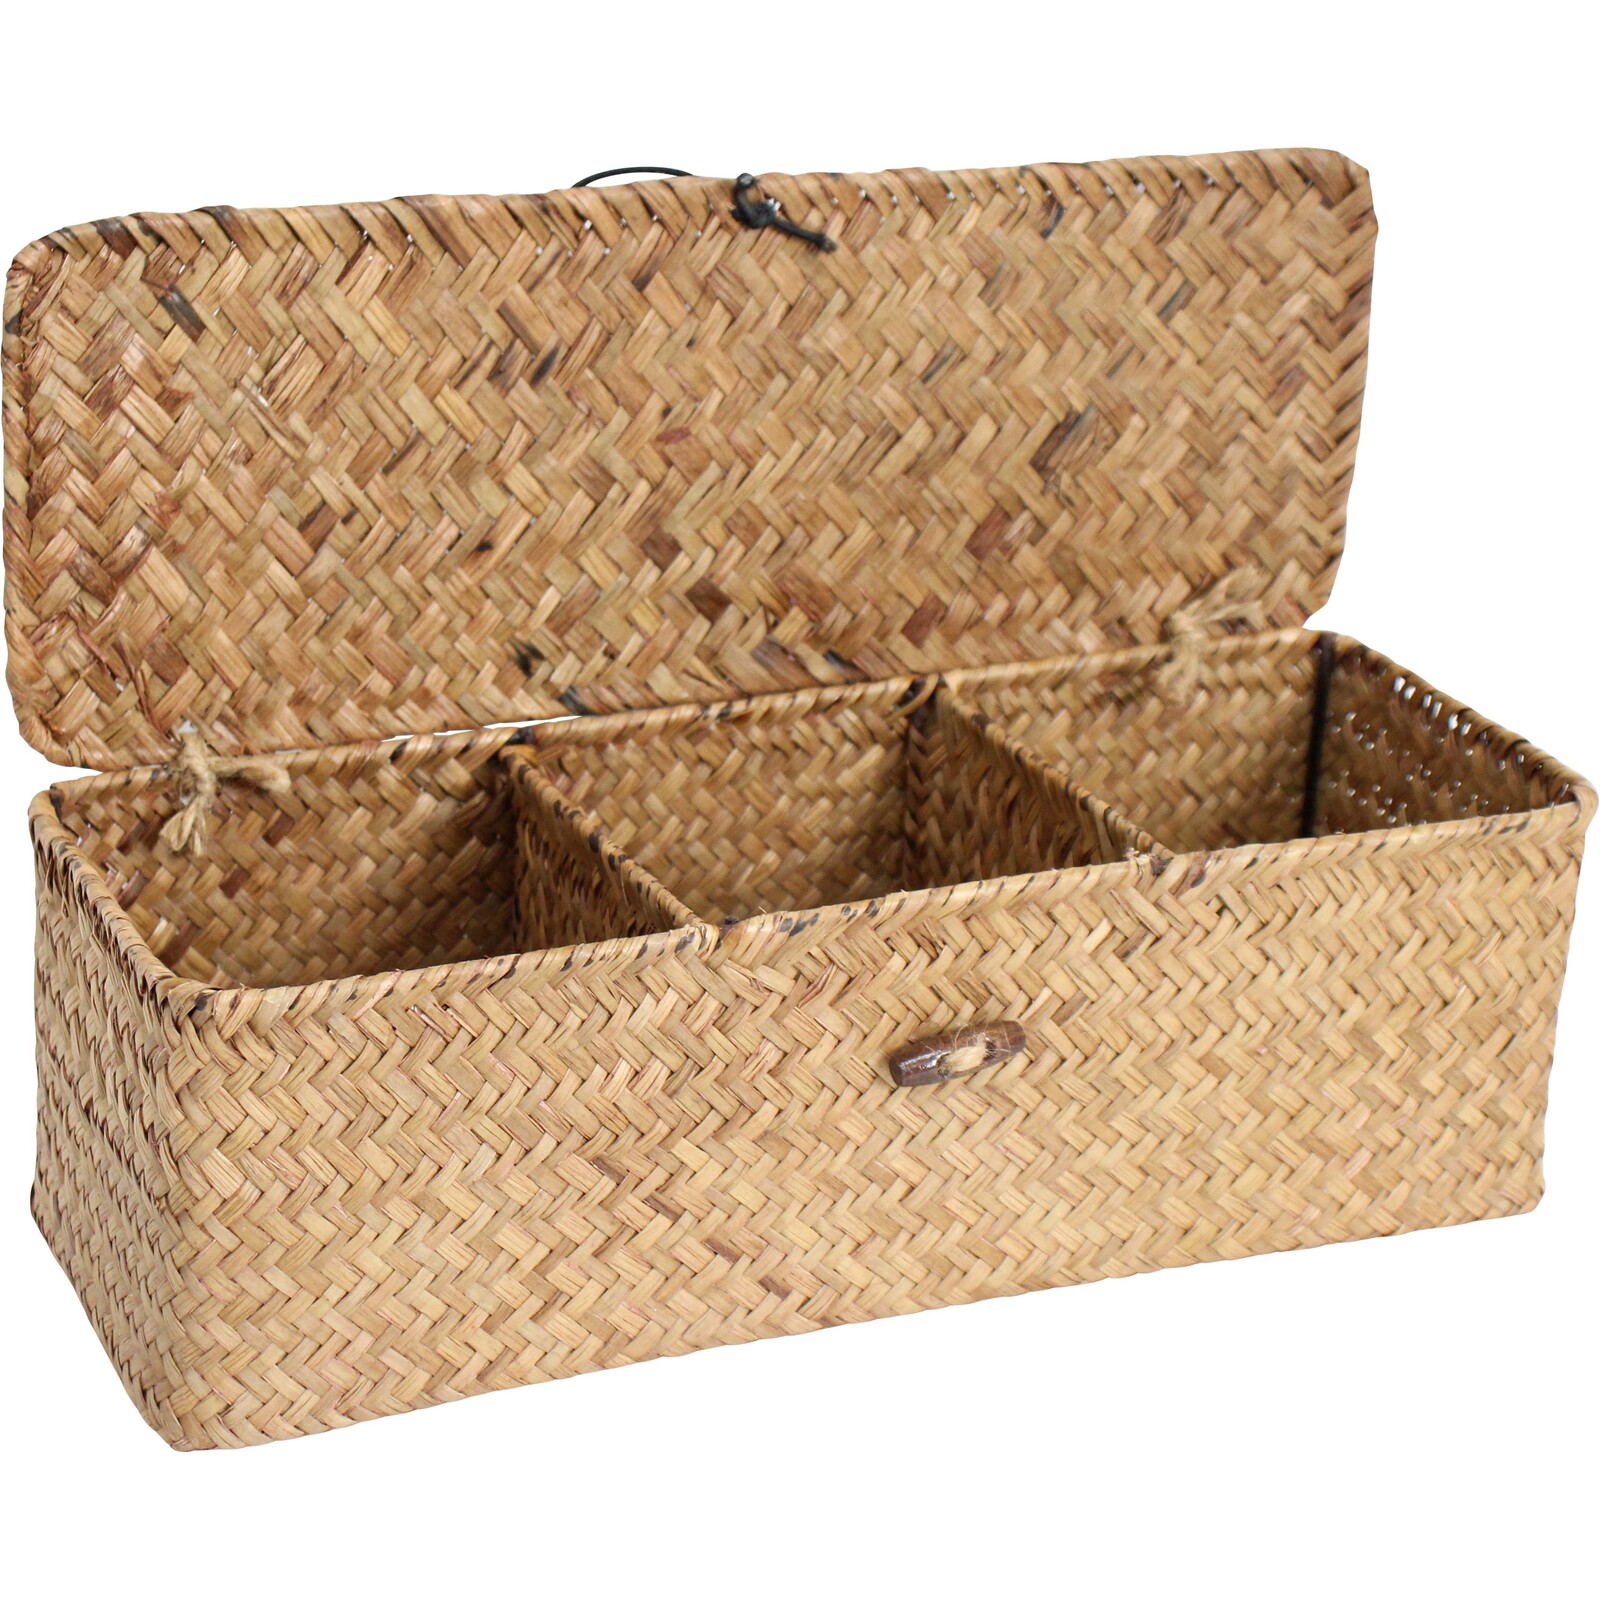 Woven Case w/ Sections Nat